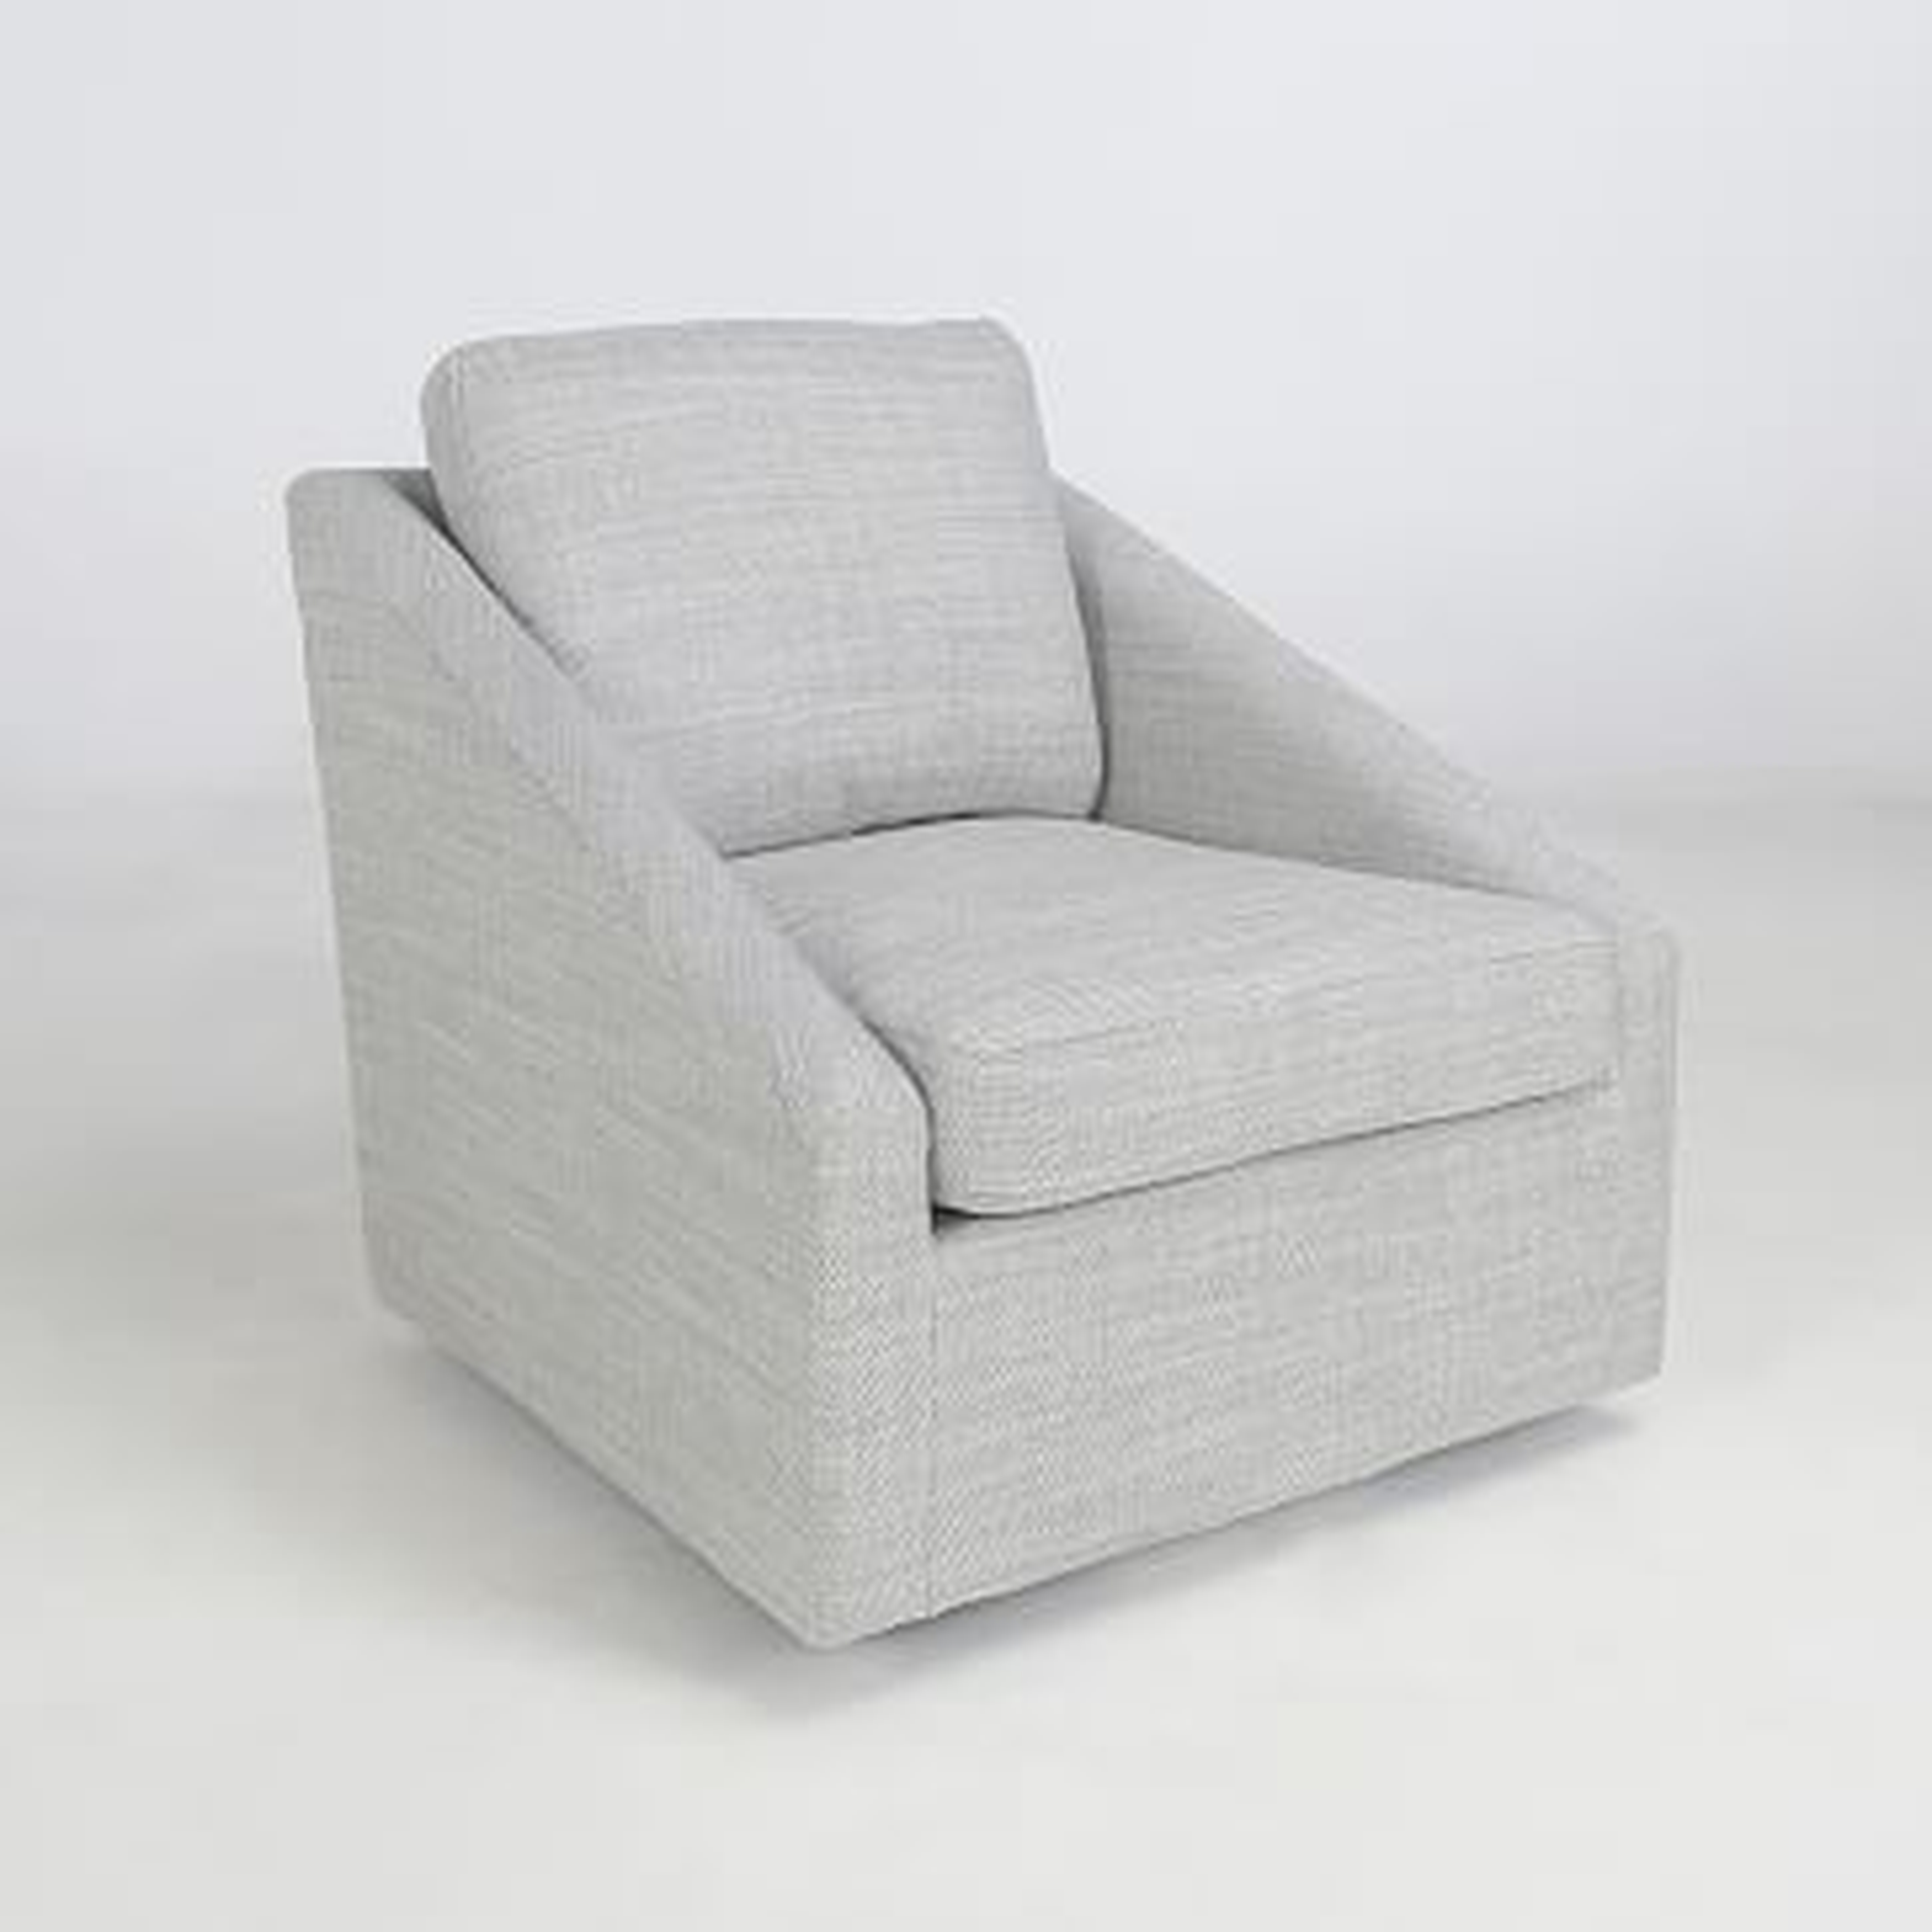 Sloped Arms Chair - West Elm